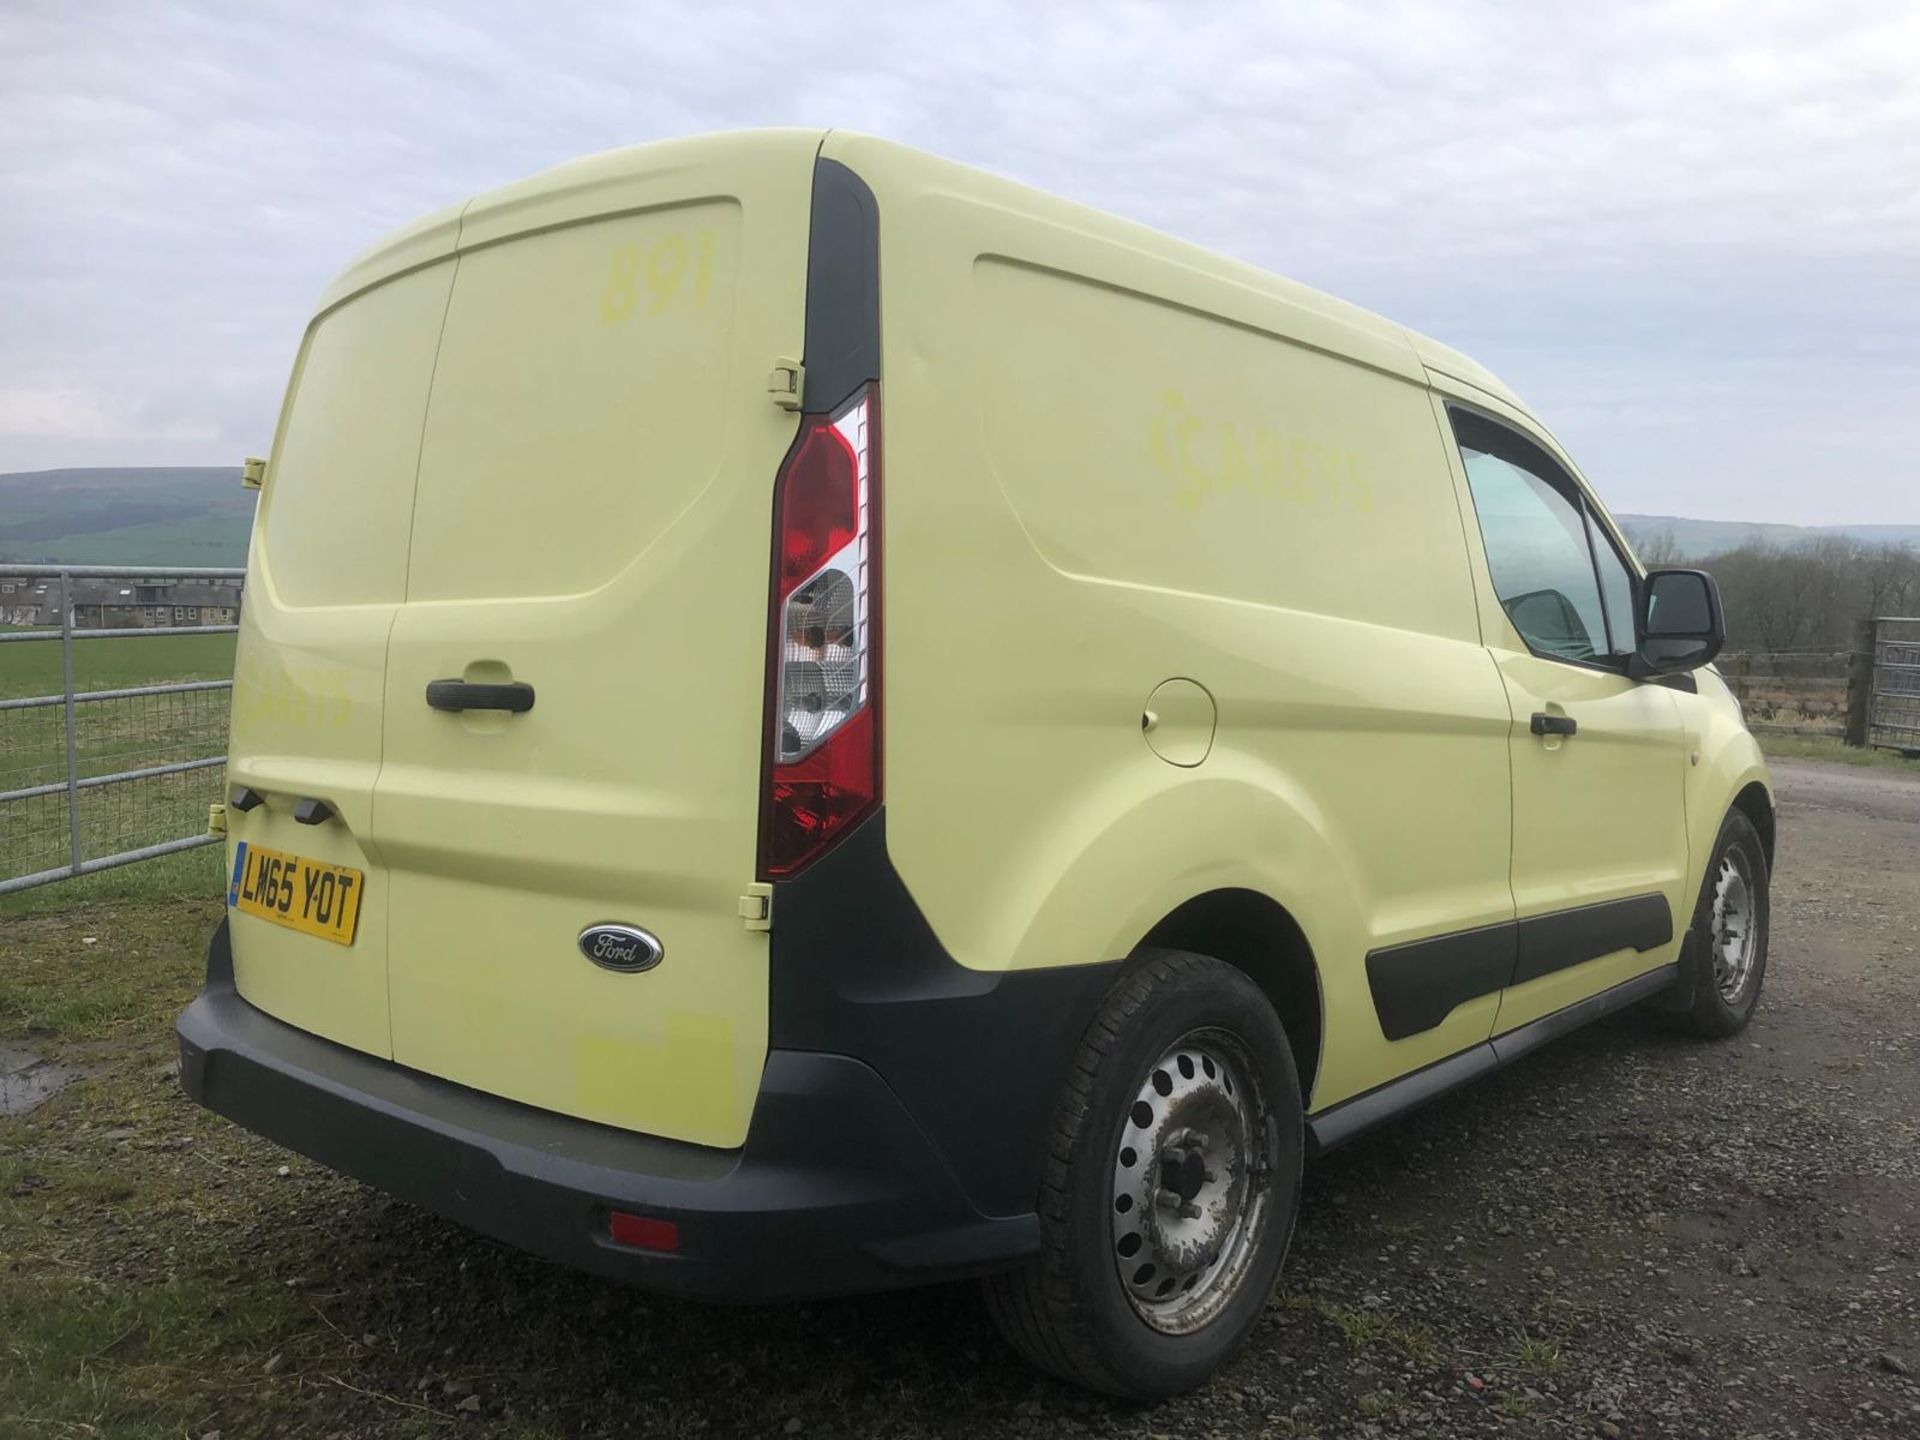 2015 FORD TRANSIT CONNECT 200 PANEL VAN - 1.6 TDCI - 91621 MILES - Image 14 of 15